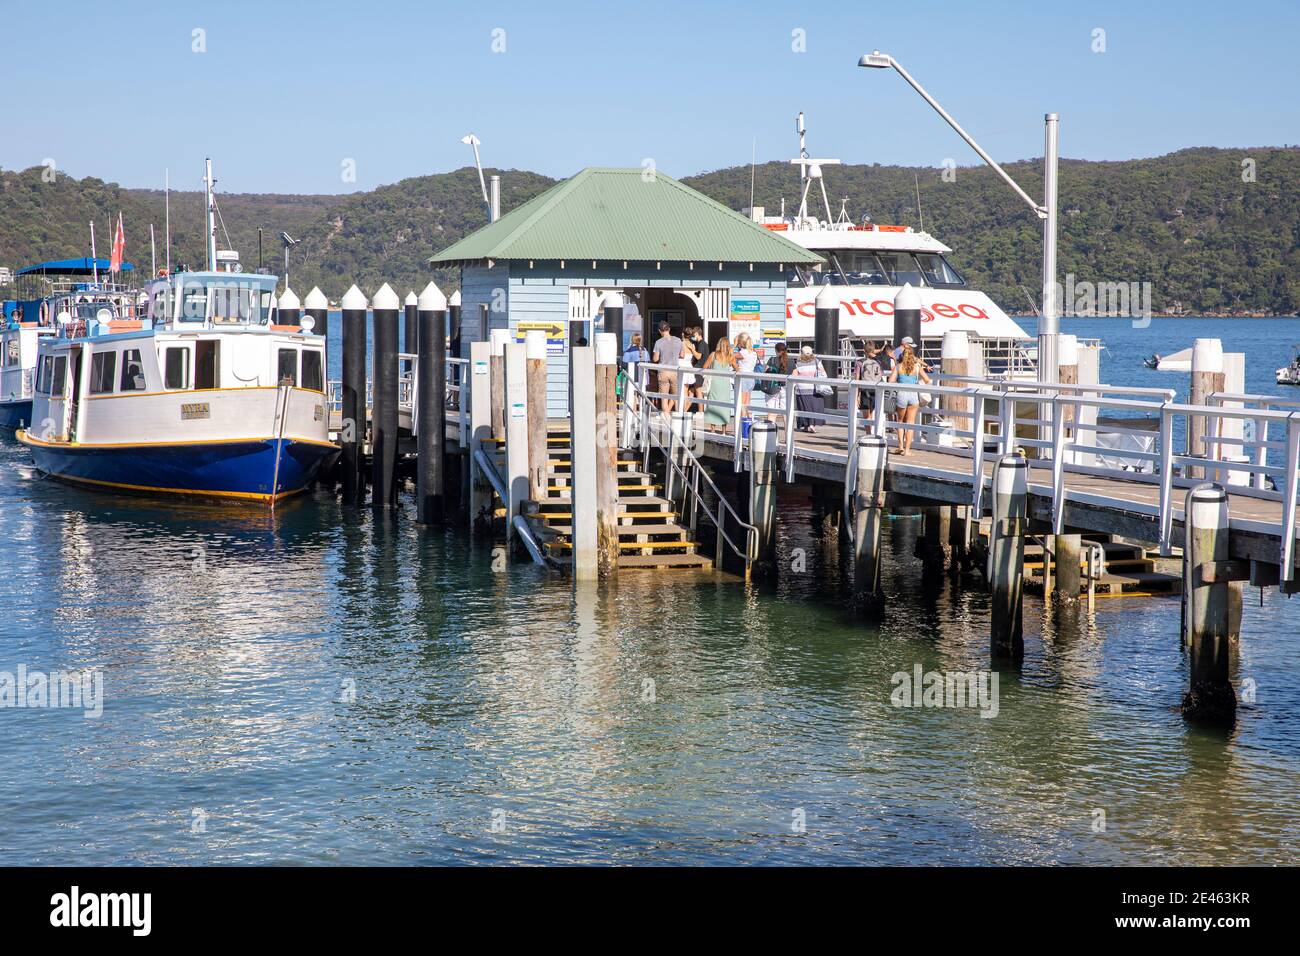 Palm Beach ferry wharf on Pittwater in Sydney northern beaches with passengers waiting to board Fantasea ferry boat,Sydney,NSW,Australia Stock Photo